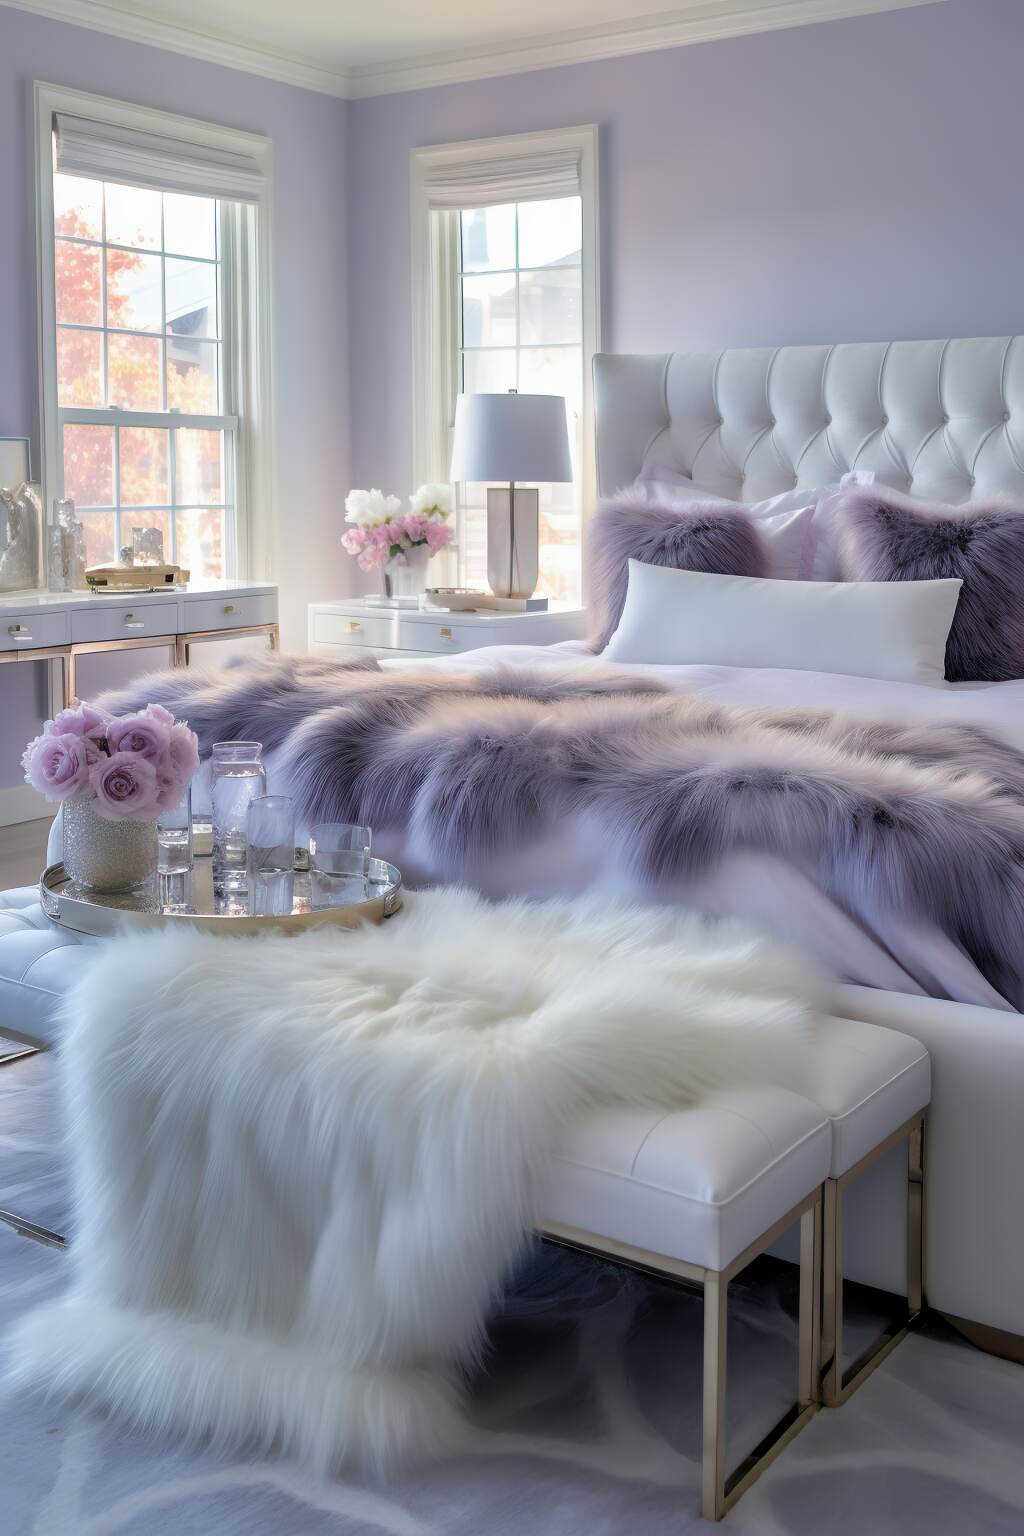 A Bedroom Featuring A Large Bed With A Tufted White Headboard, Lavishly Adorned With A Plush Purple Faux Fur Throw Blanket And Matching Pillows. A White Fur Bench Sits At The Foot Of The Bed. The Room Has Lavender Walls, Two Windows With A View Of Autumn Trees, A Bedside Table With A Modern Lamp, And Fresh Pink Flowers In Vases Adding A Soft Touch.